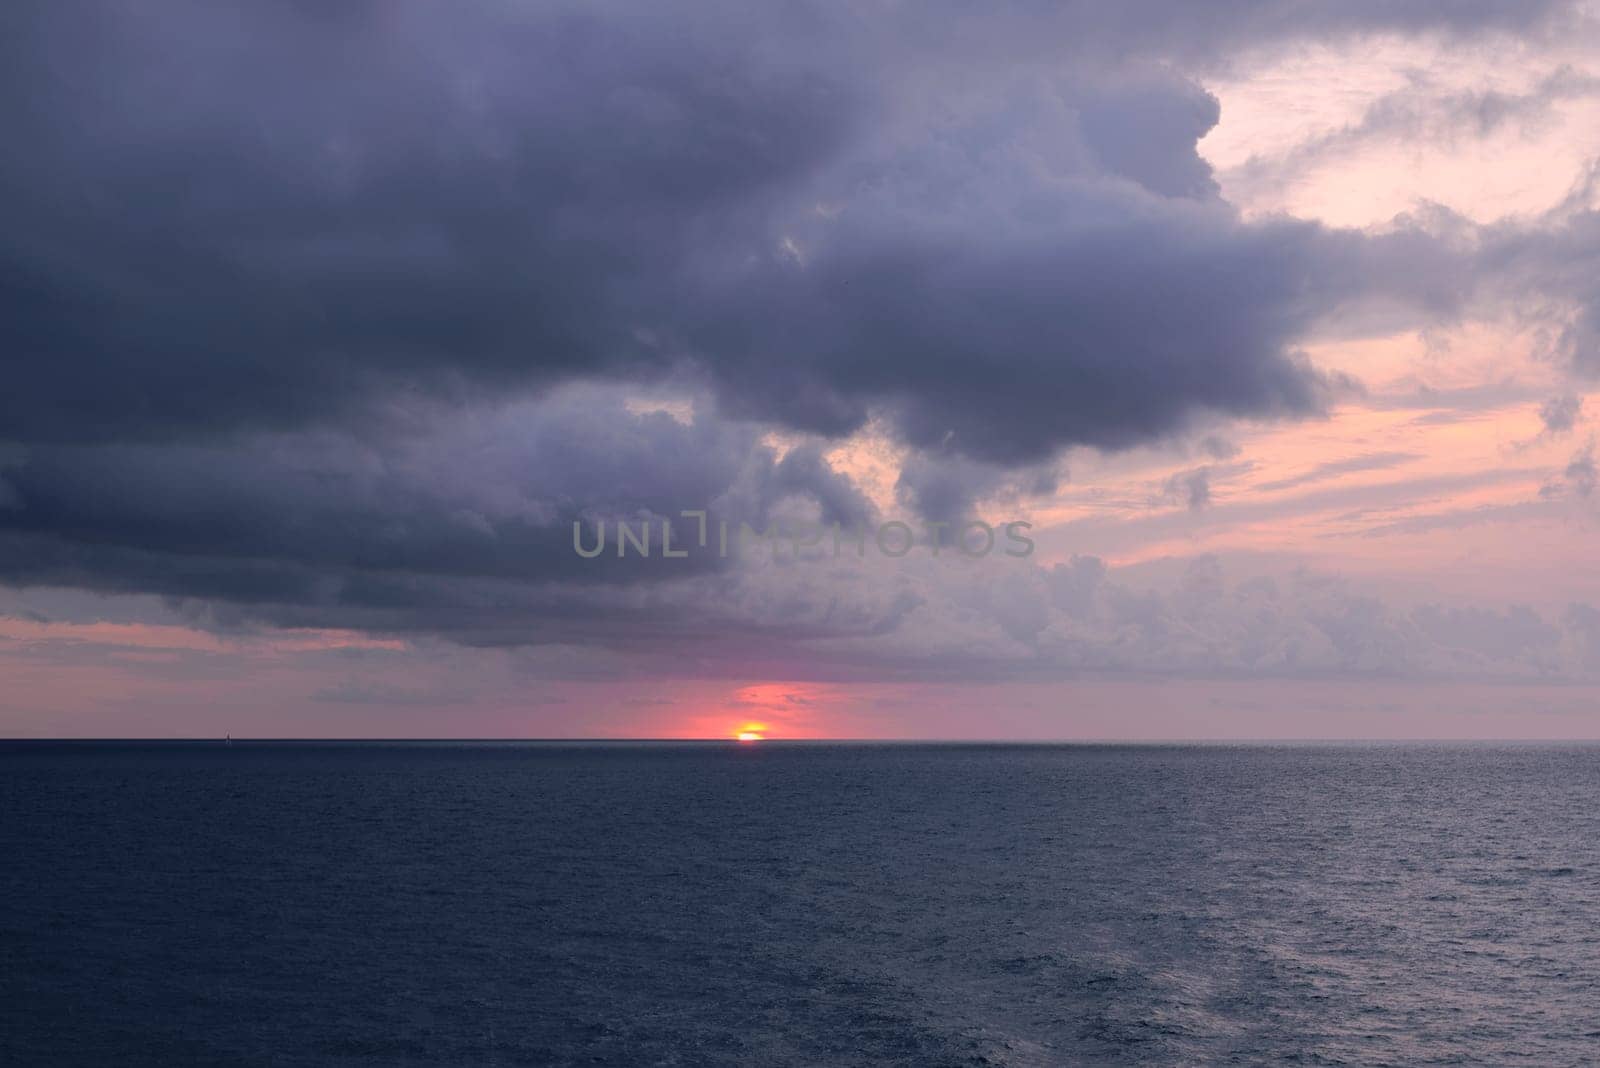 Sunset over the mediterranean sea on a cloudy day by raul_ruiz